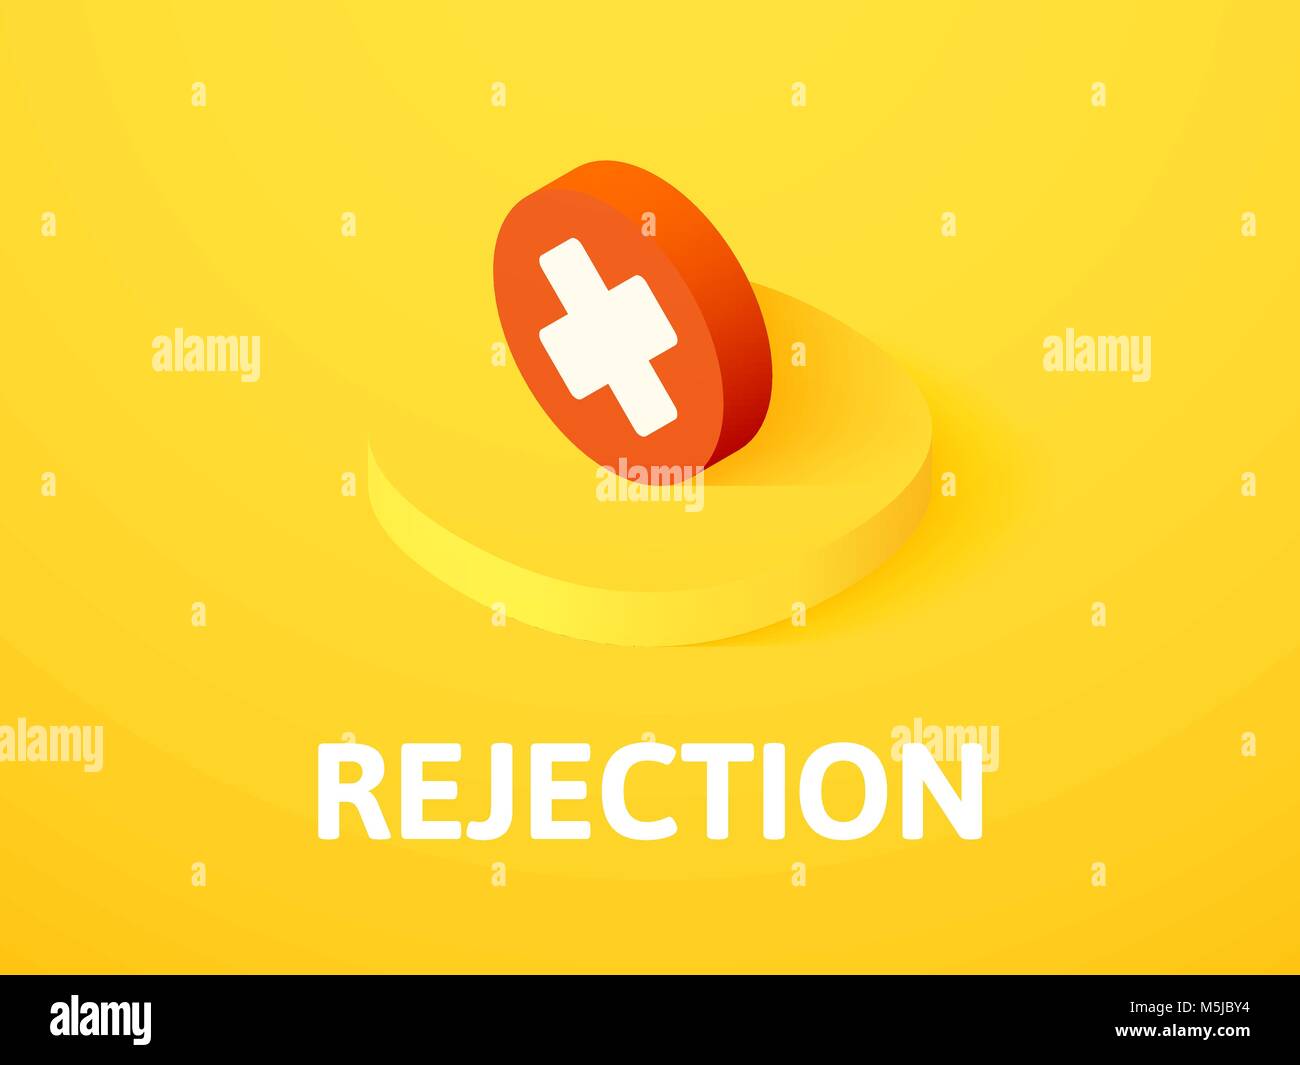 Rejection isometric icon, isolated on color background Stock Vector